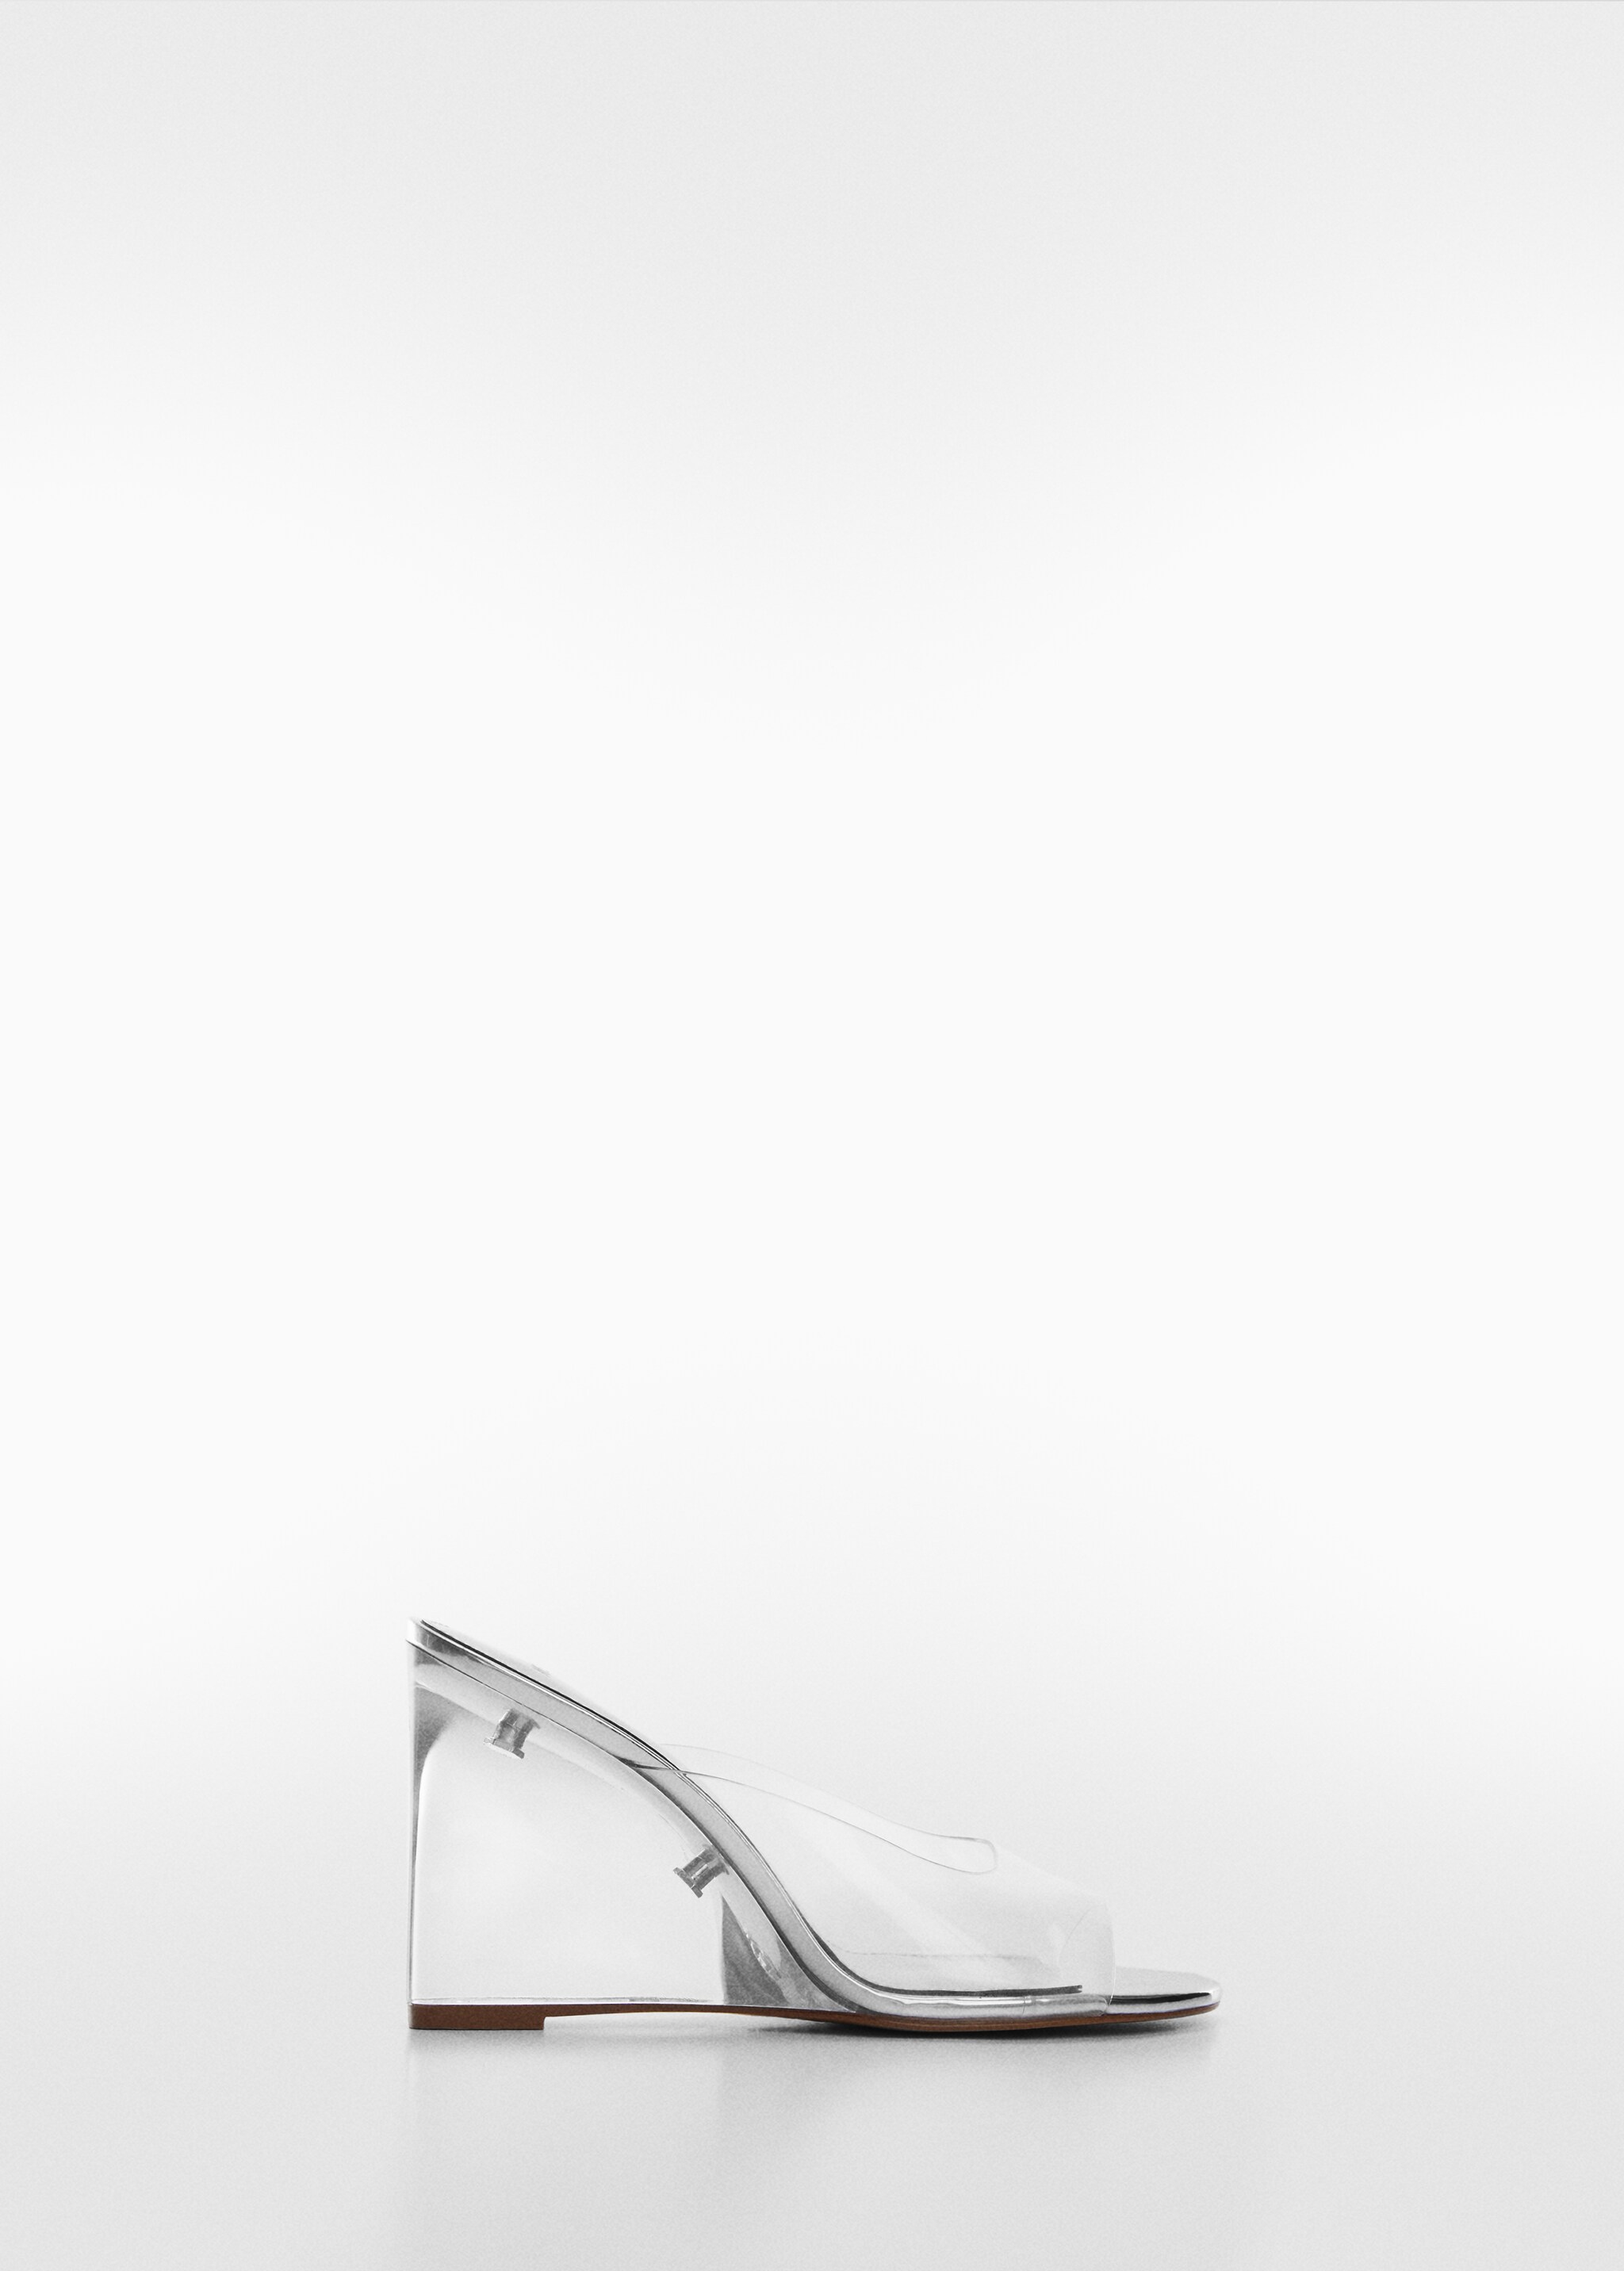 Transparent vinyl wedge sandals - Article without model